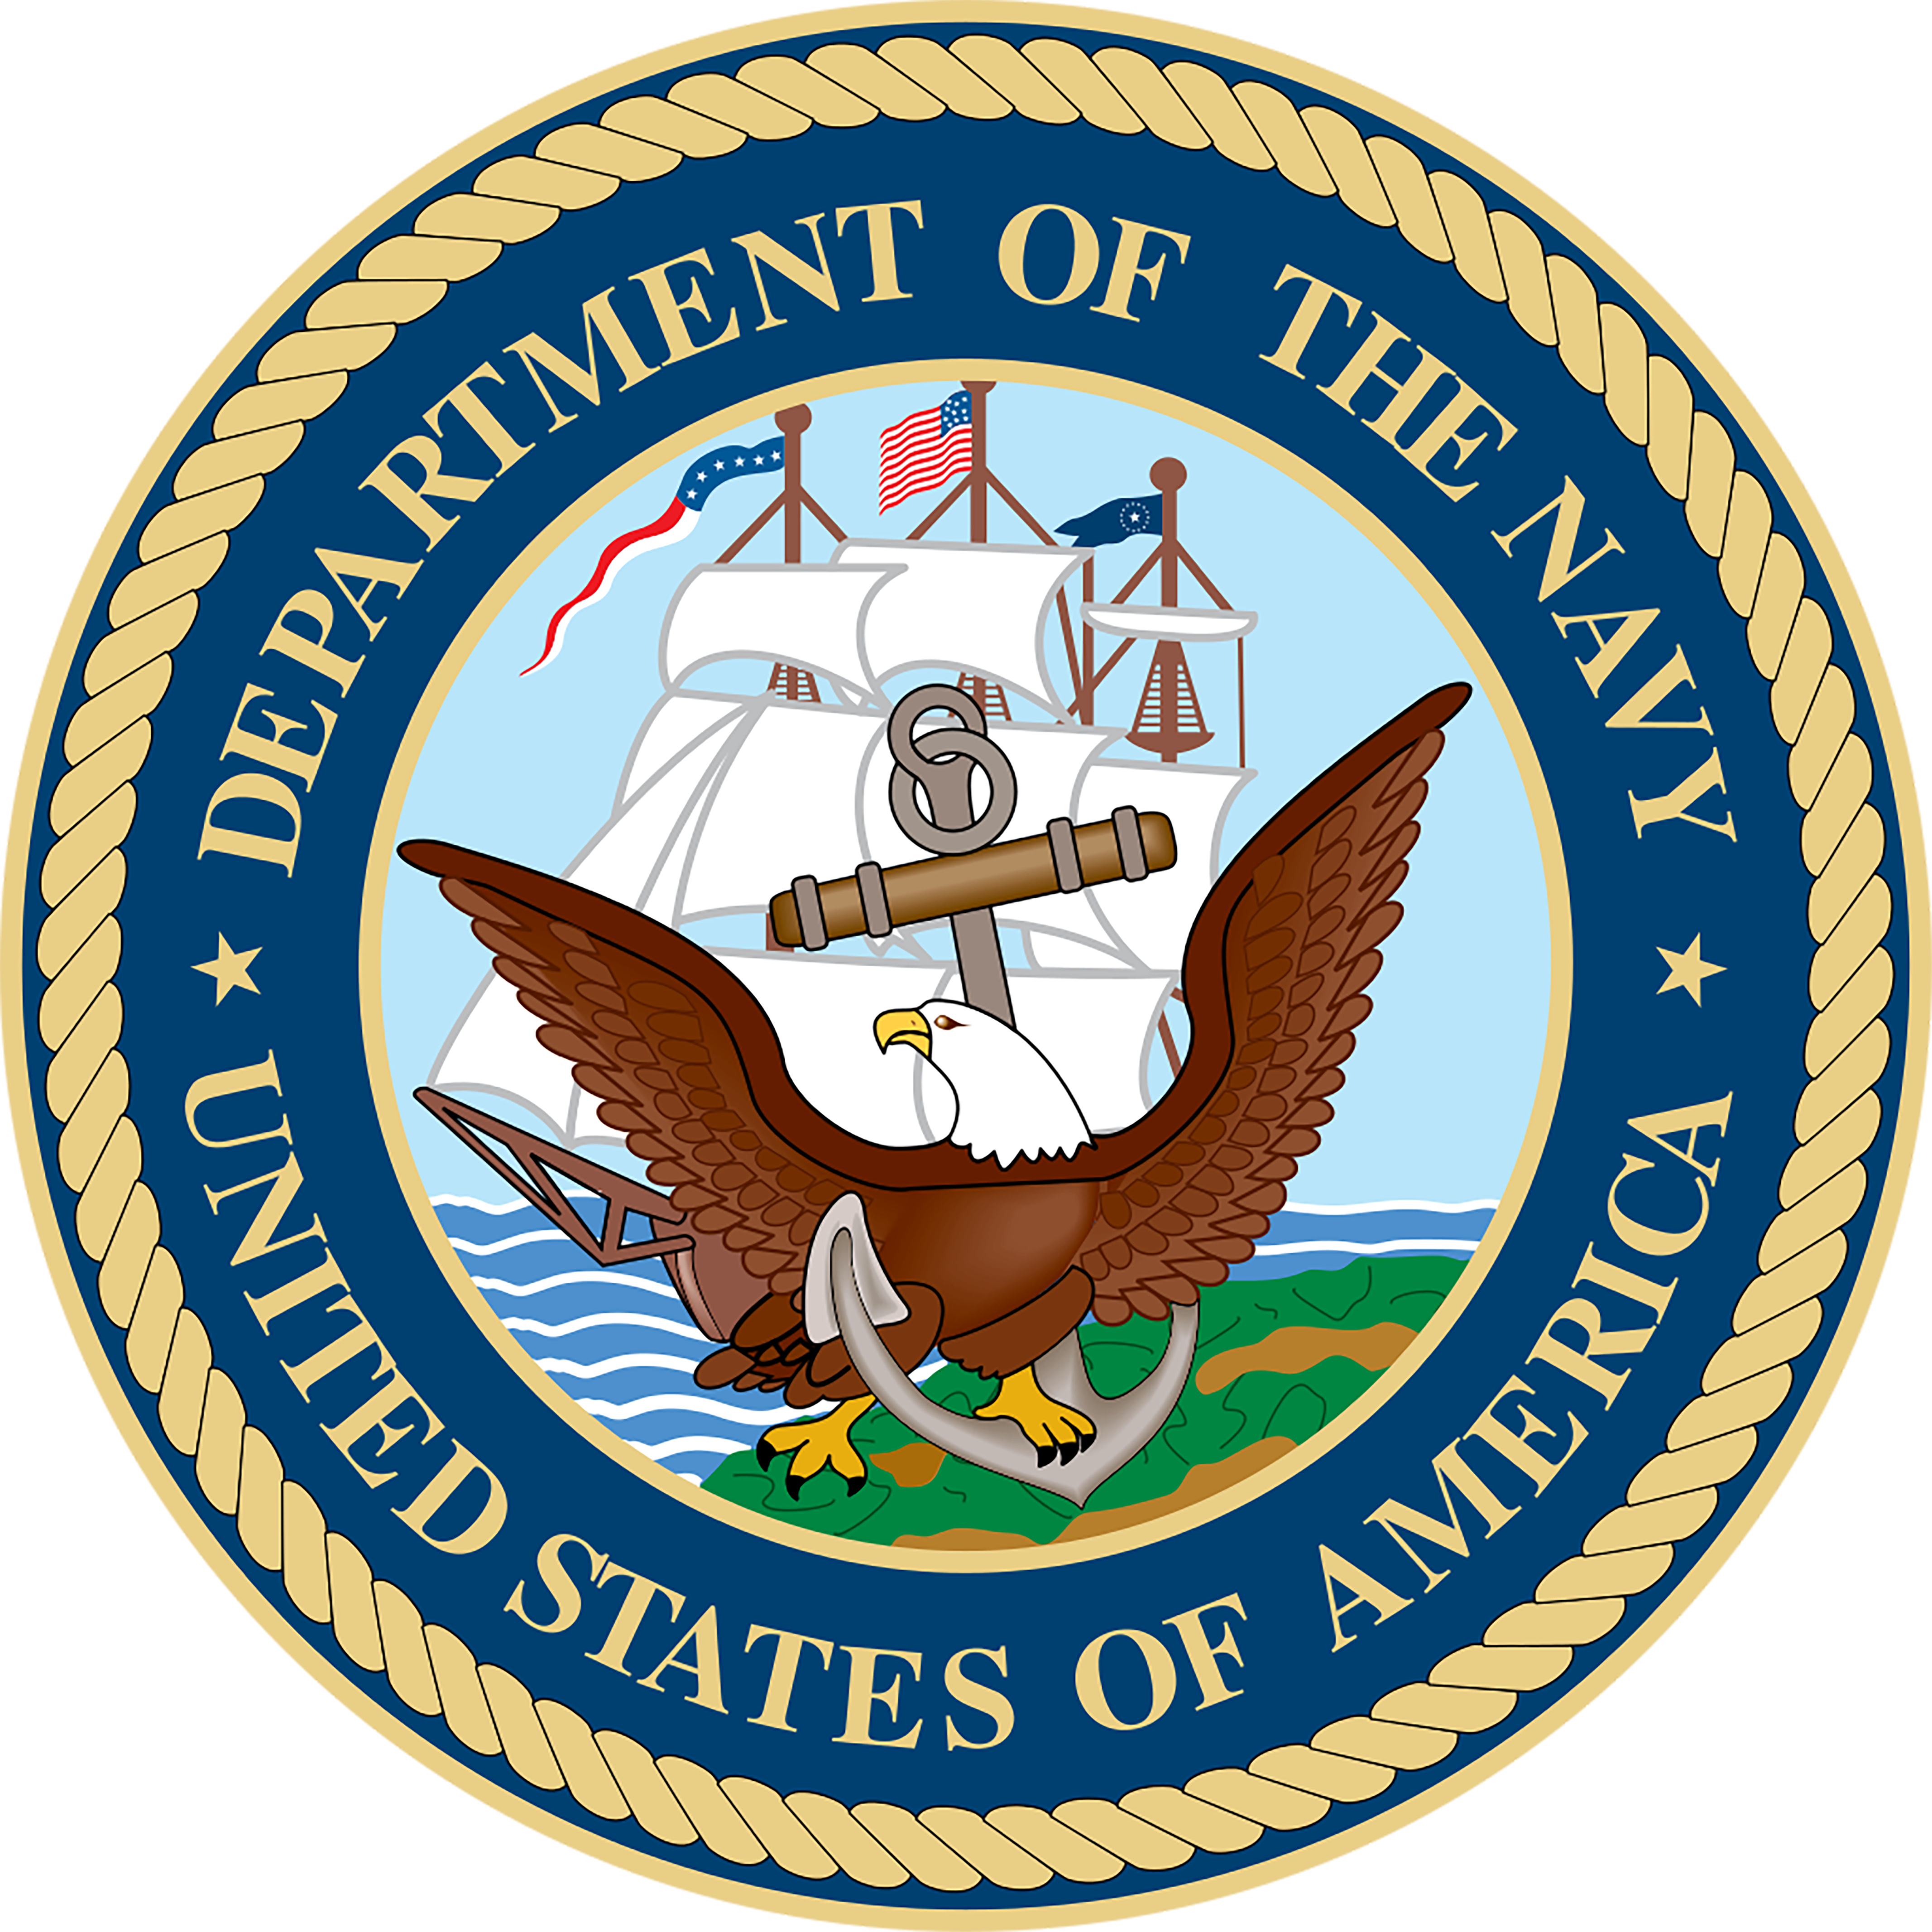  Department of the Navy: This is an image of the United States Department of the Navy logo